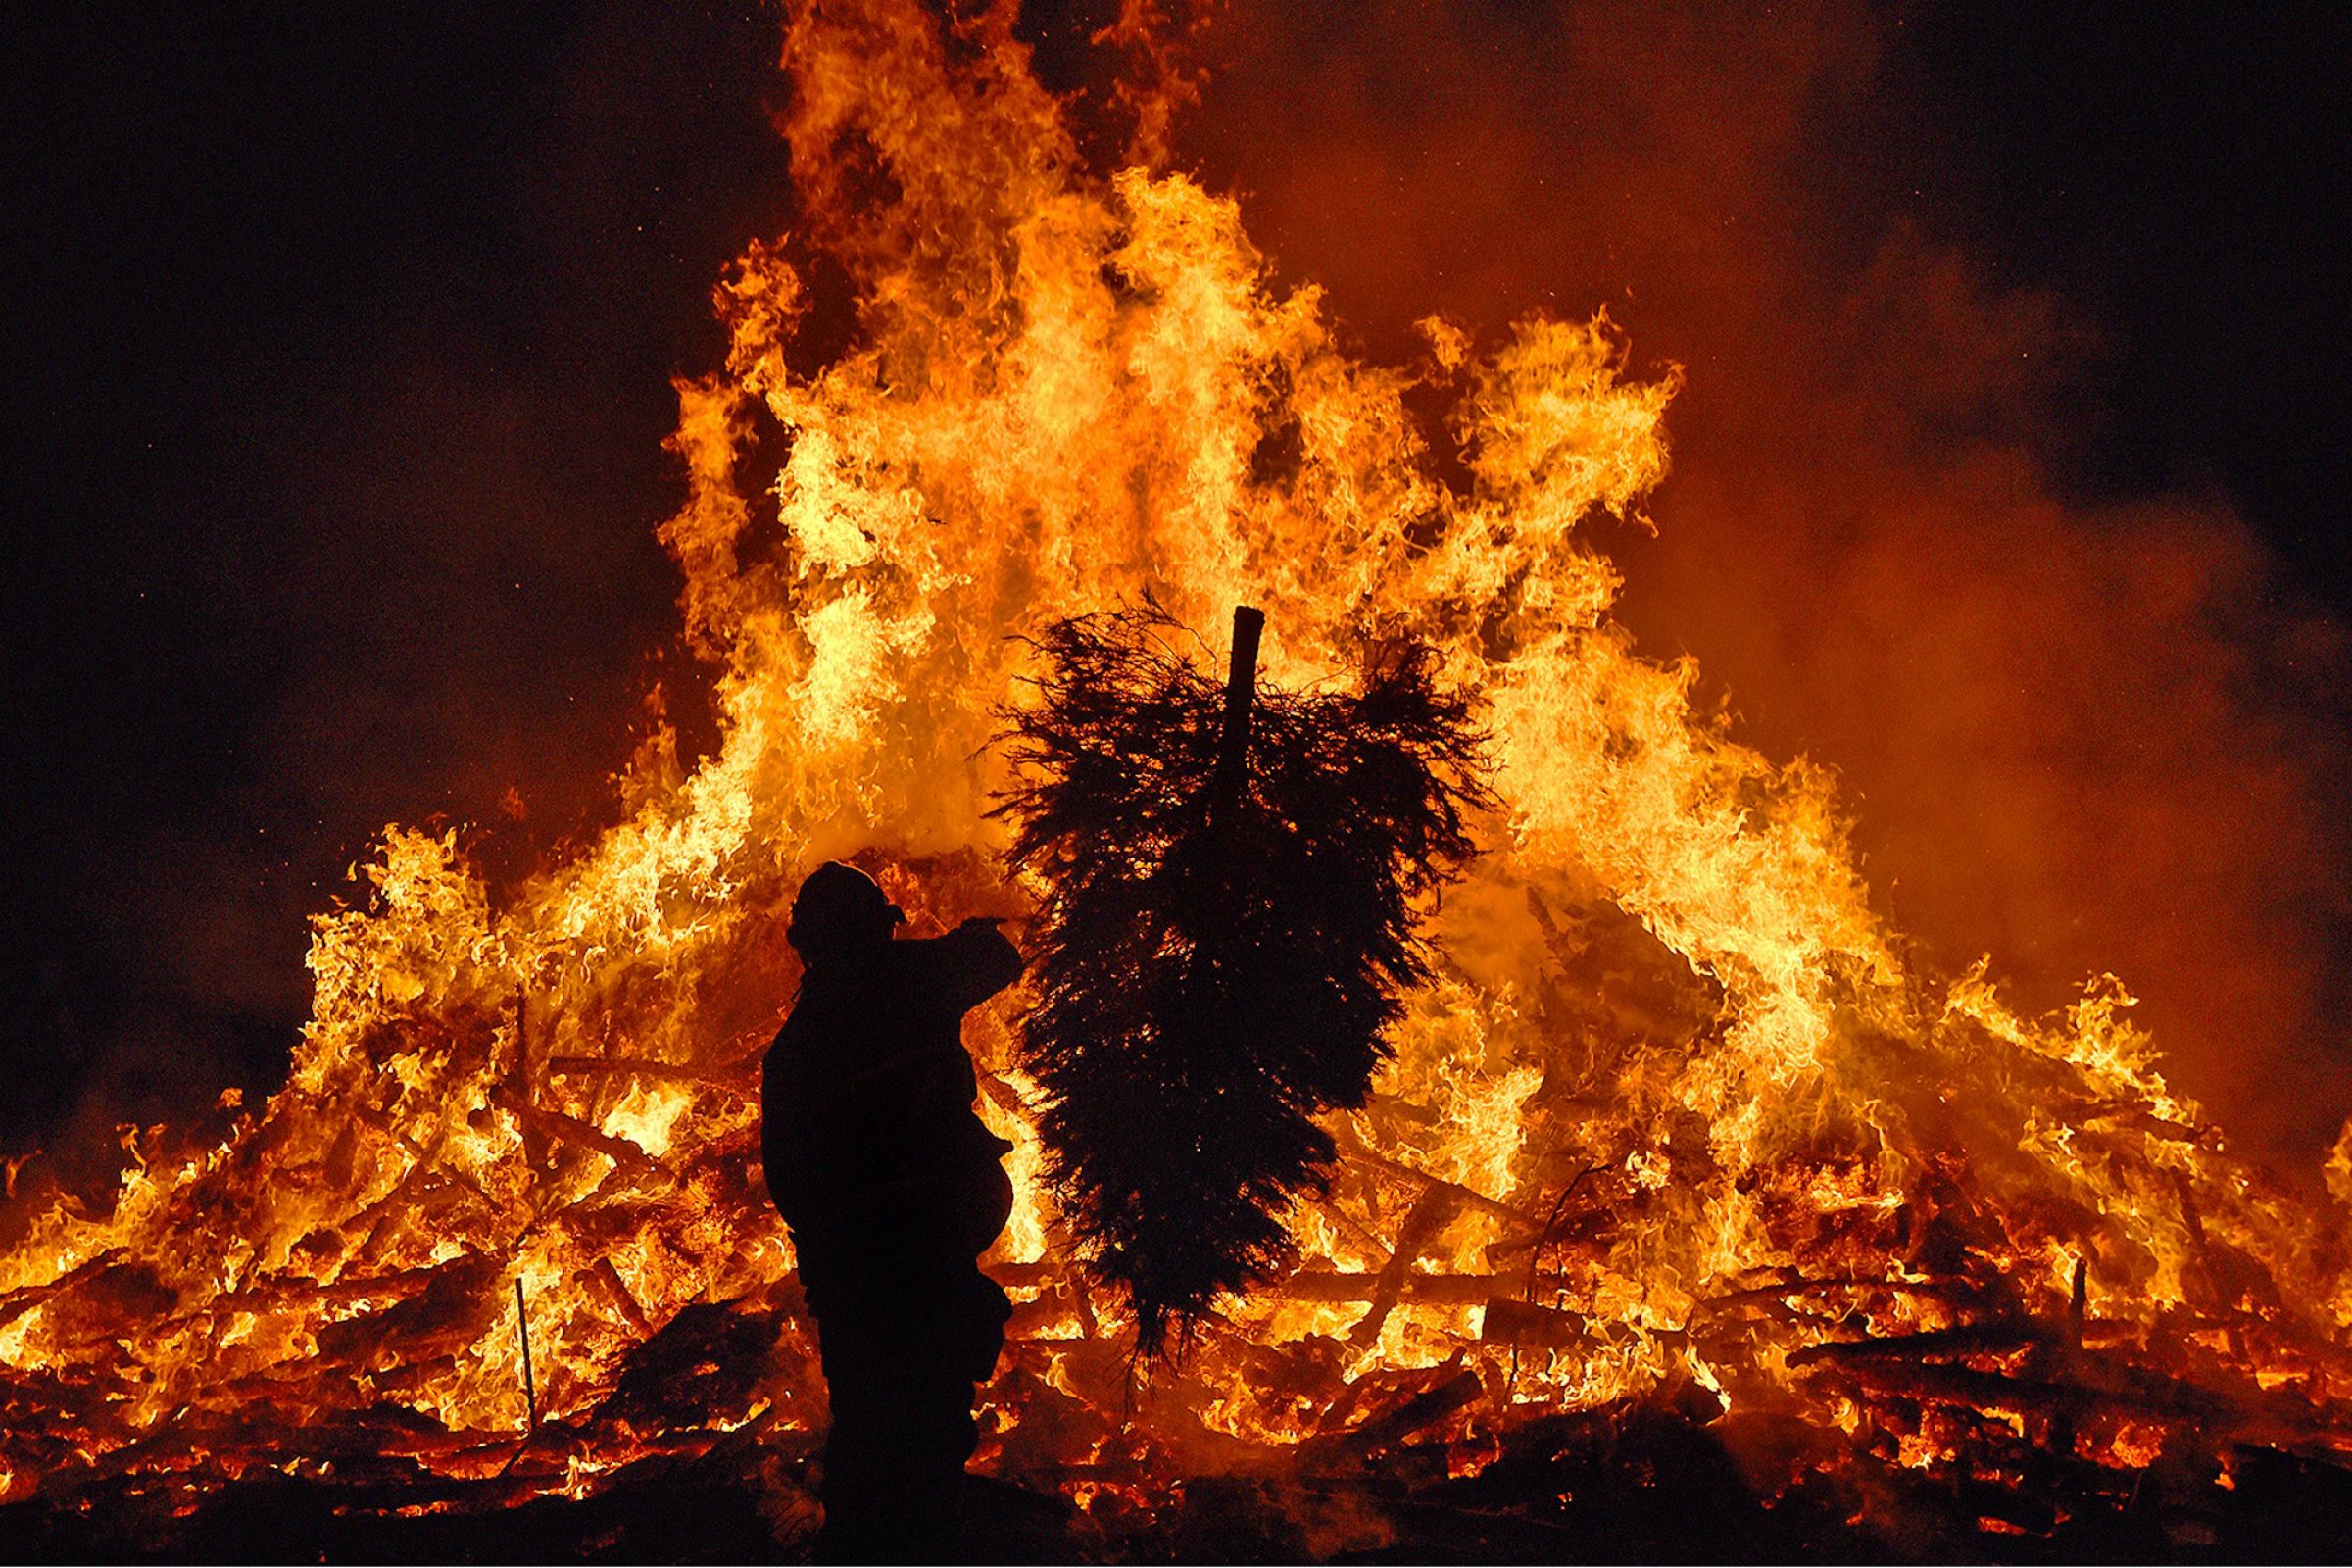 Solvang’s Christmas Tree Burn Fires Up After Year Off